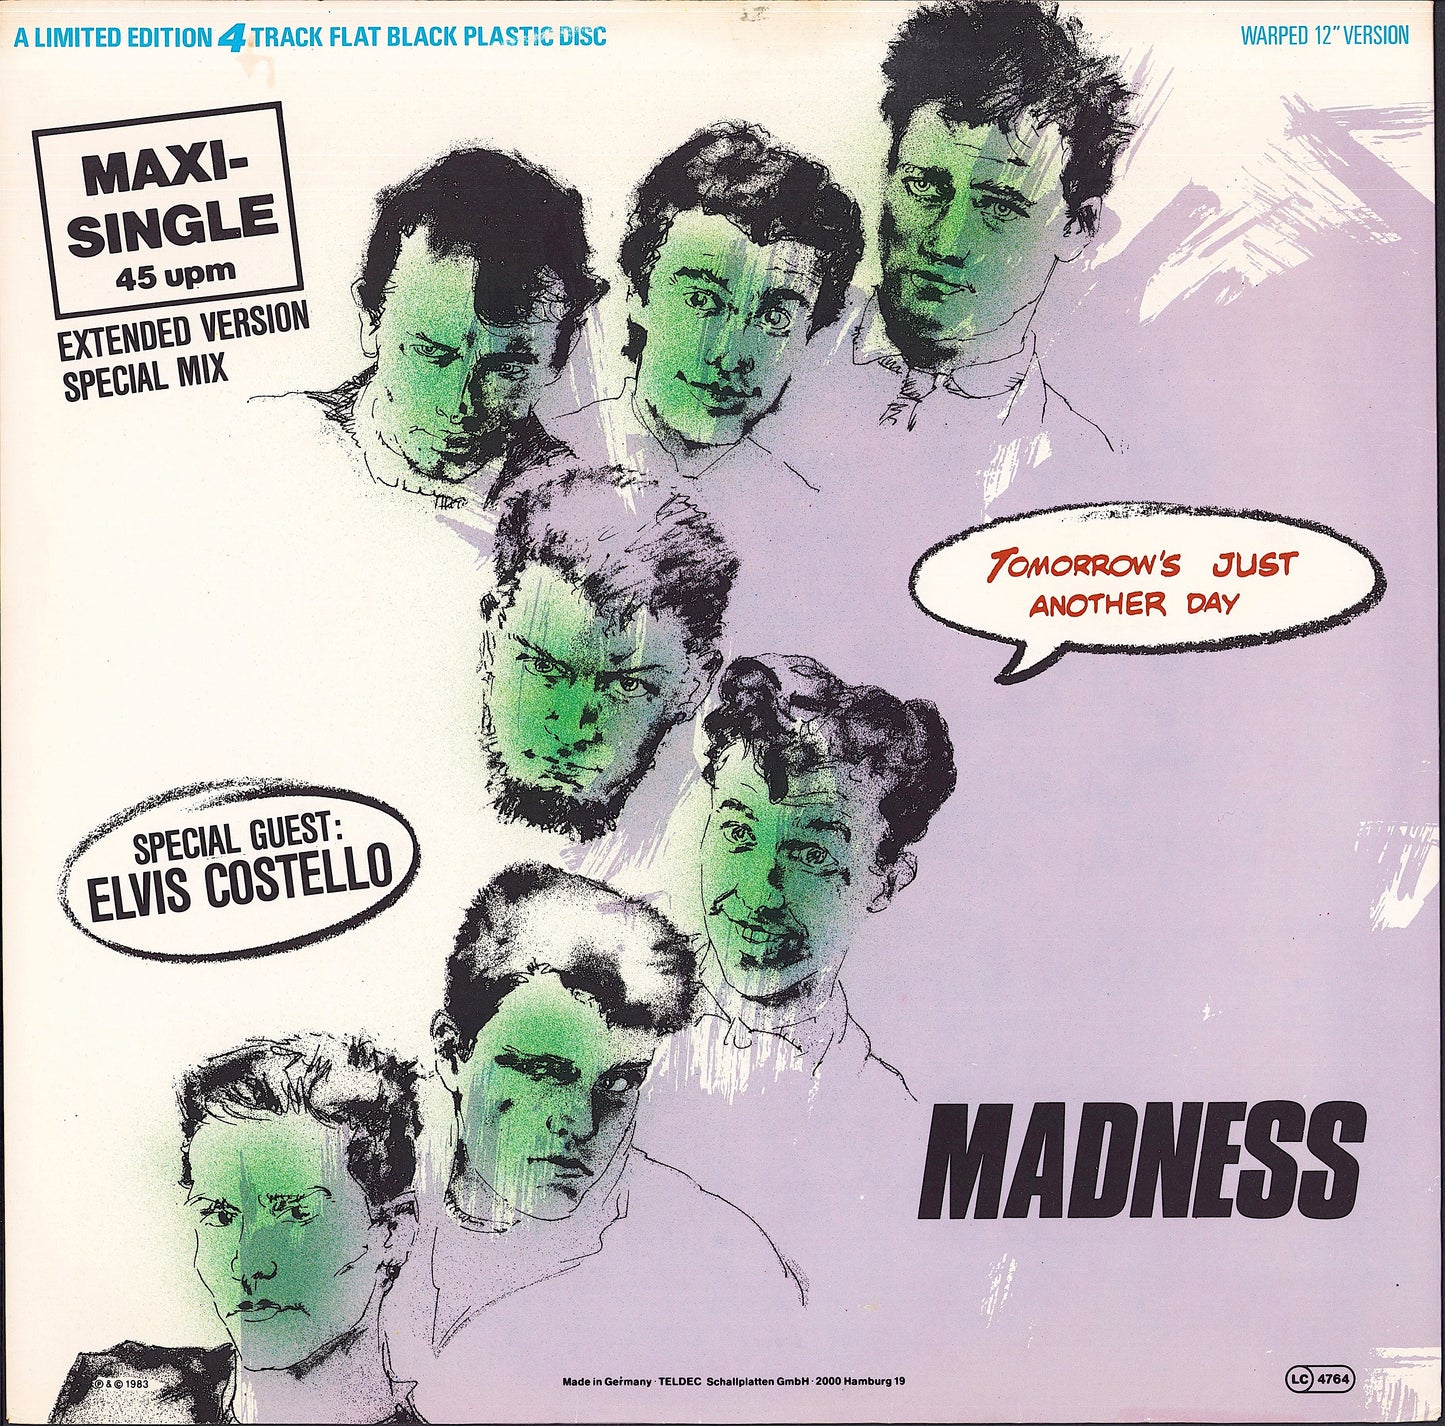 Madness ‎- Tomorrow's Just Another Day (Warped 12" Version) (Vinyl 12")